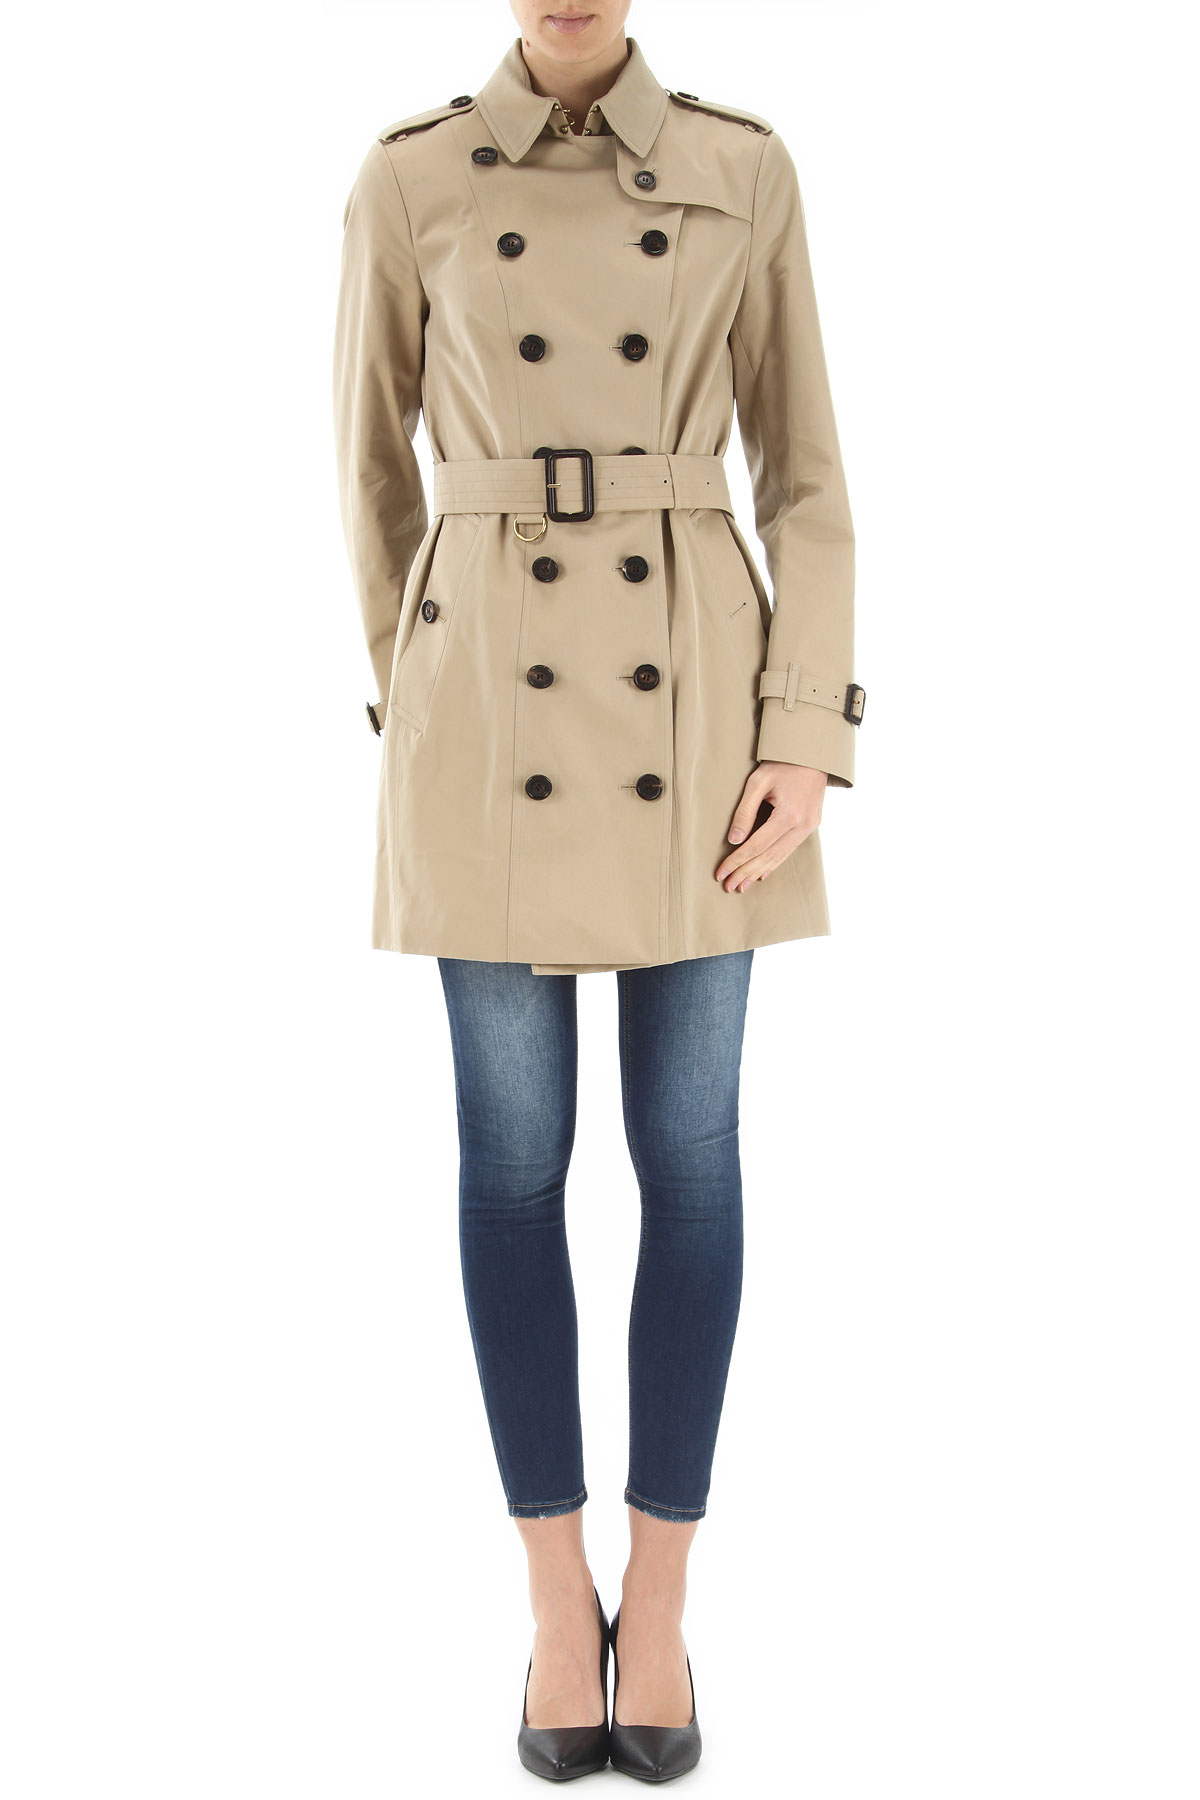 Womens Clothing Burberry, Style code: 3900455-70500-C197